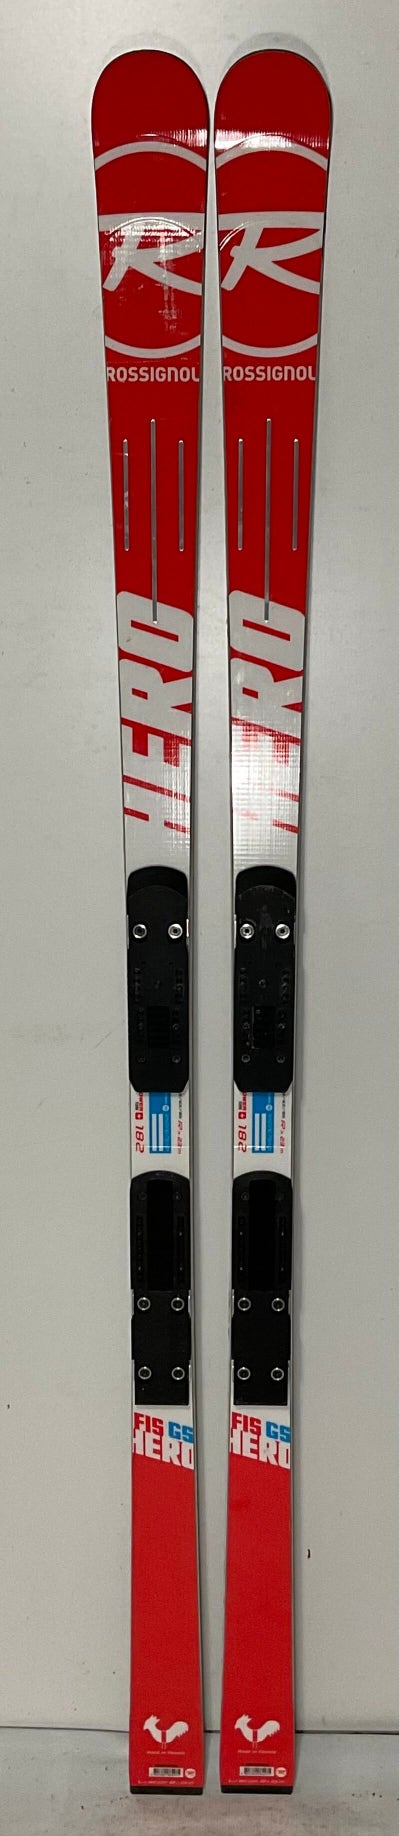 Used Rossignol 182cm Hero FIS GS Race Skis Without Bindings (481L)